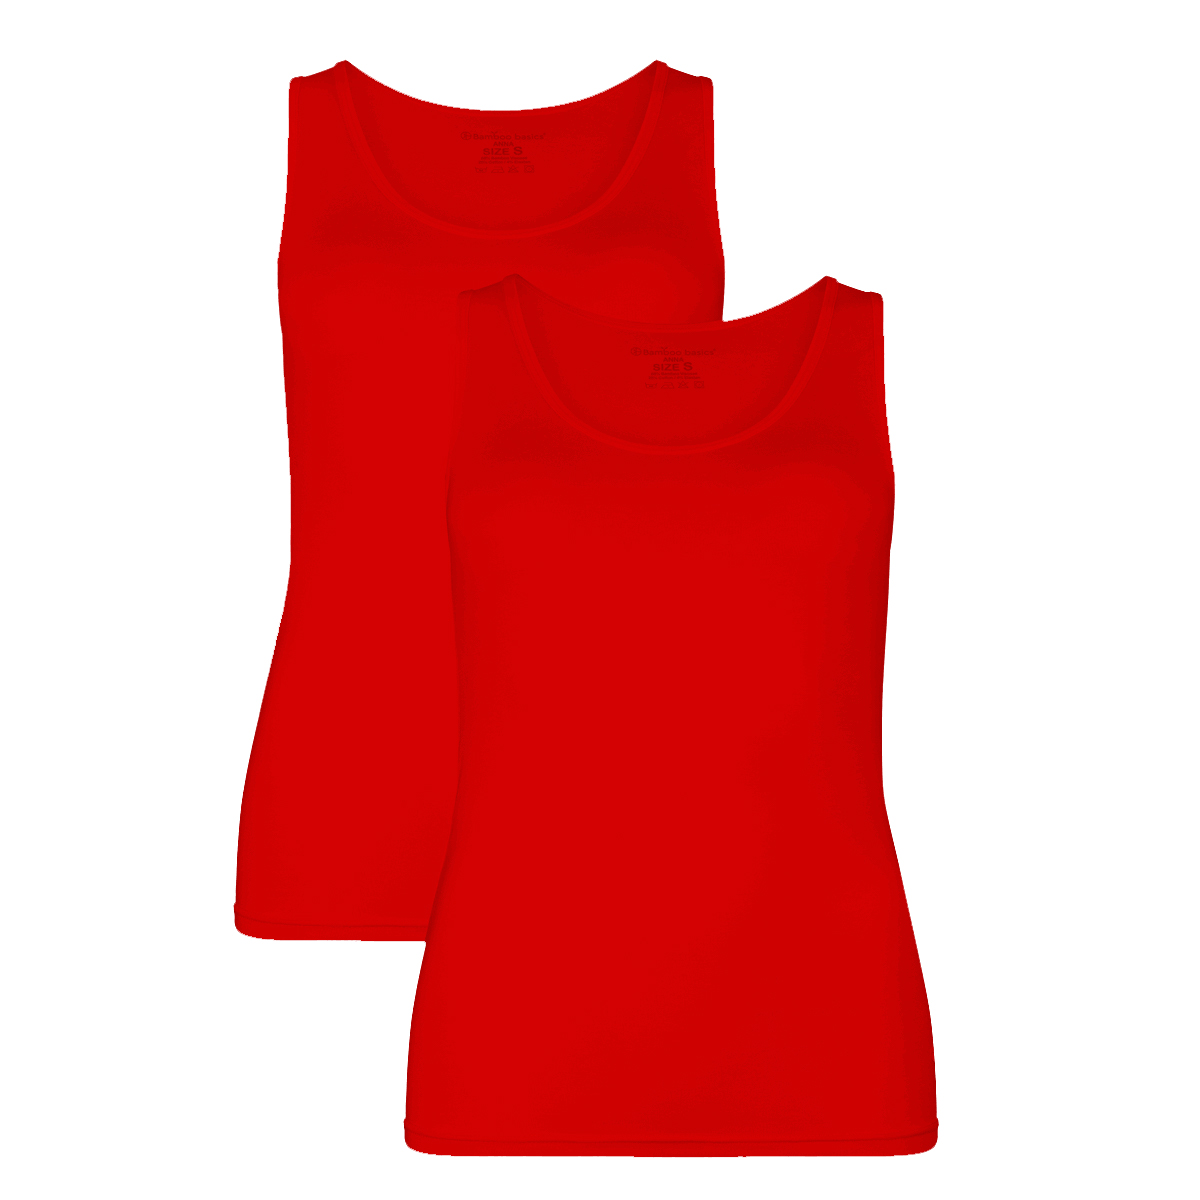 Singlets Anna (2-pack) - Rood XL